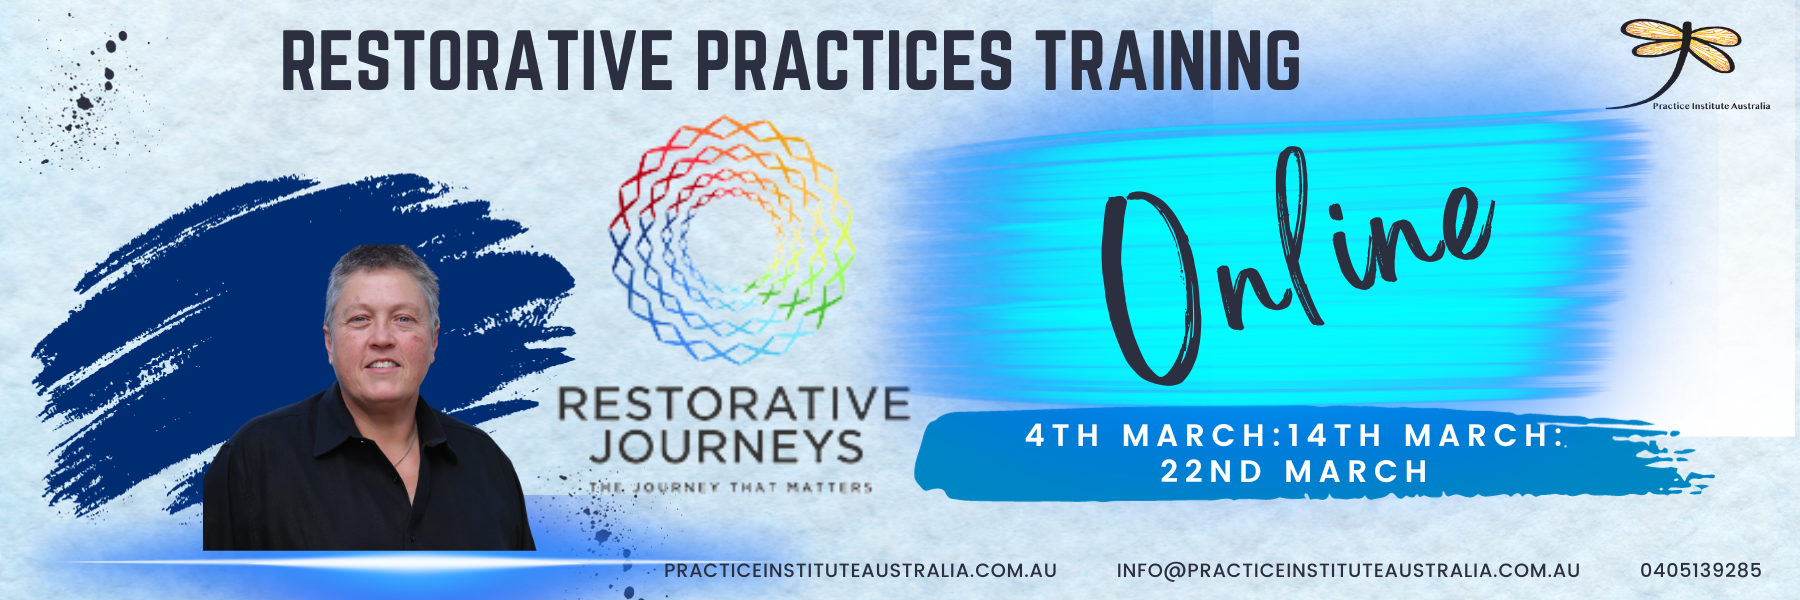 ONLINE | Restorative Practices Training facilitated by Restorative Journeys March